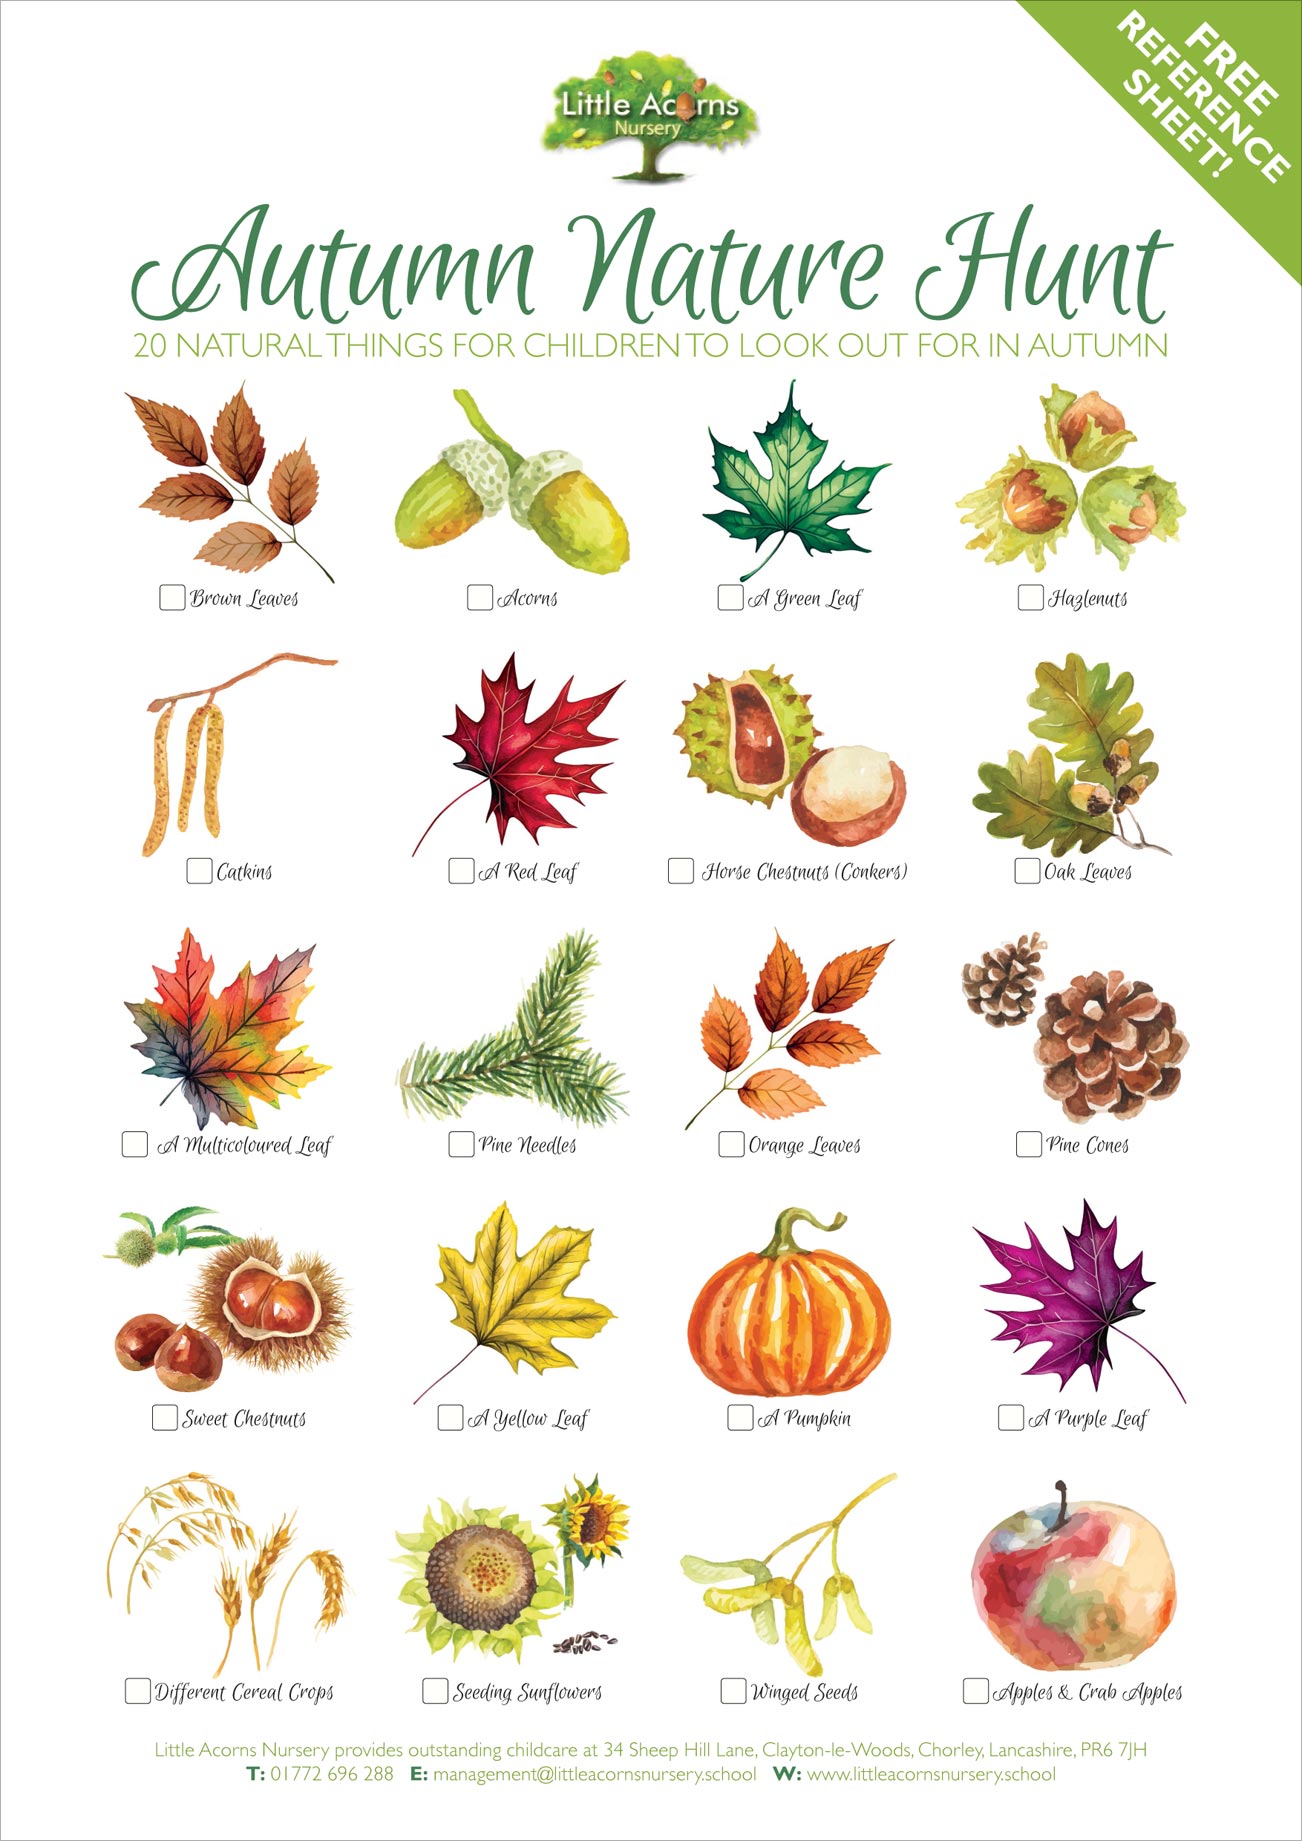 Free autumn nature hunt reference sheet (preview - click to download in Acrobat PDF format).